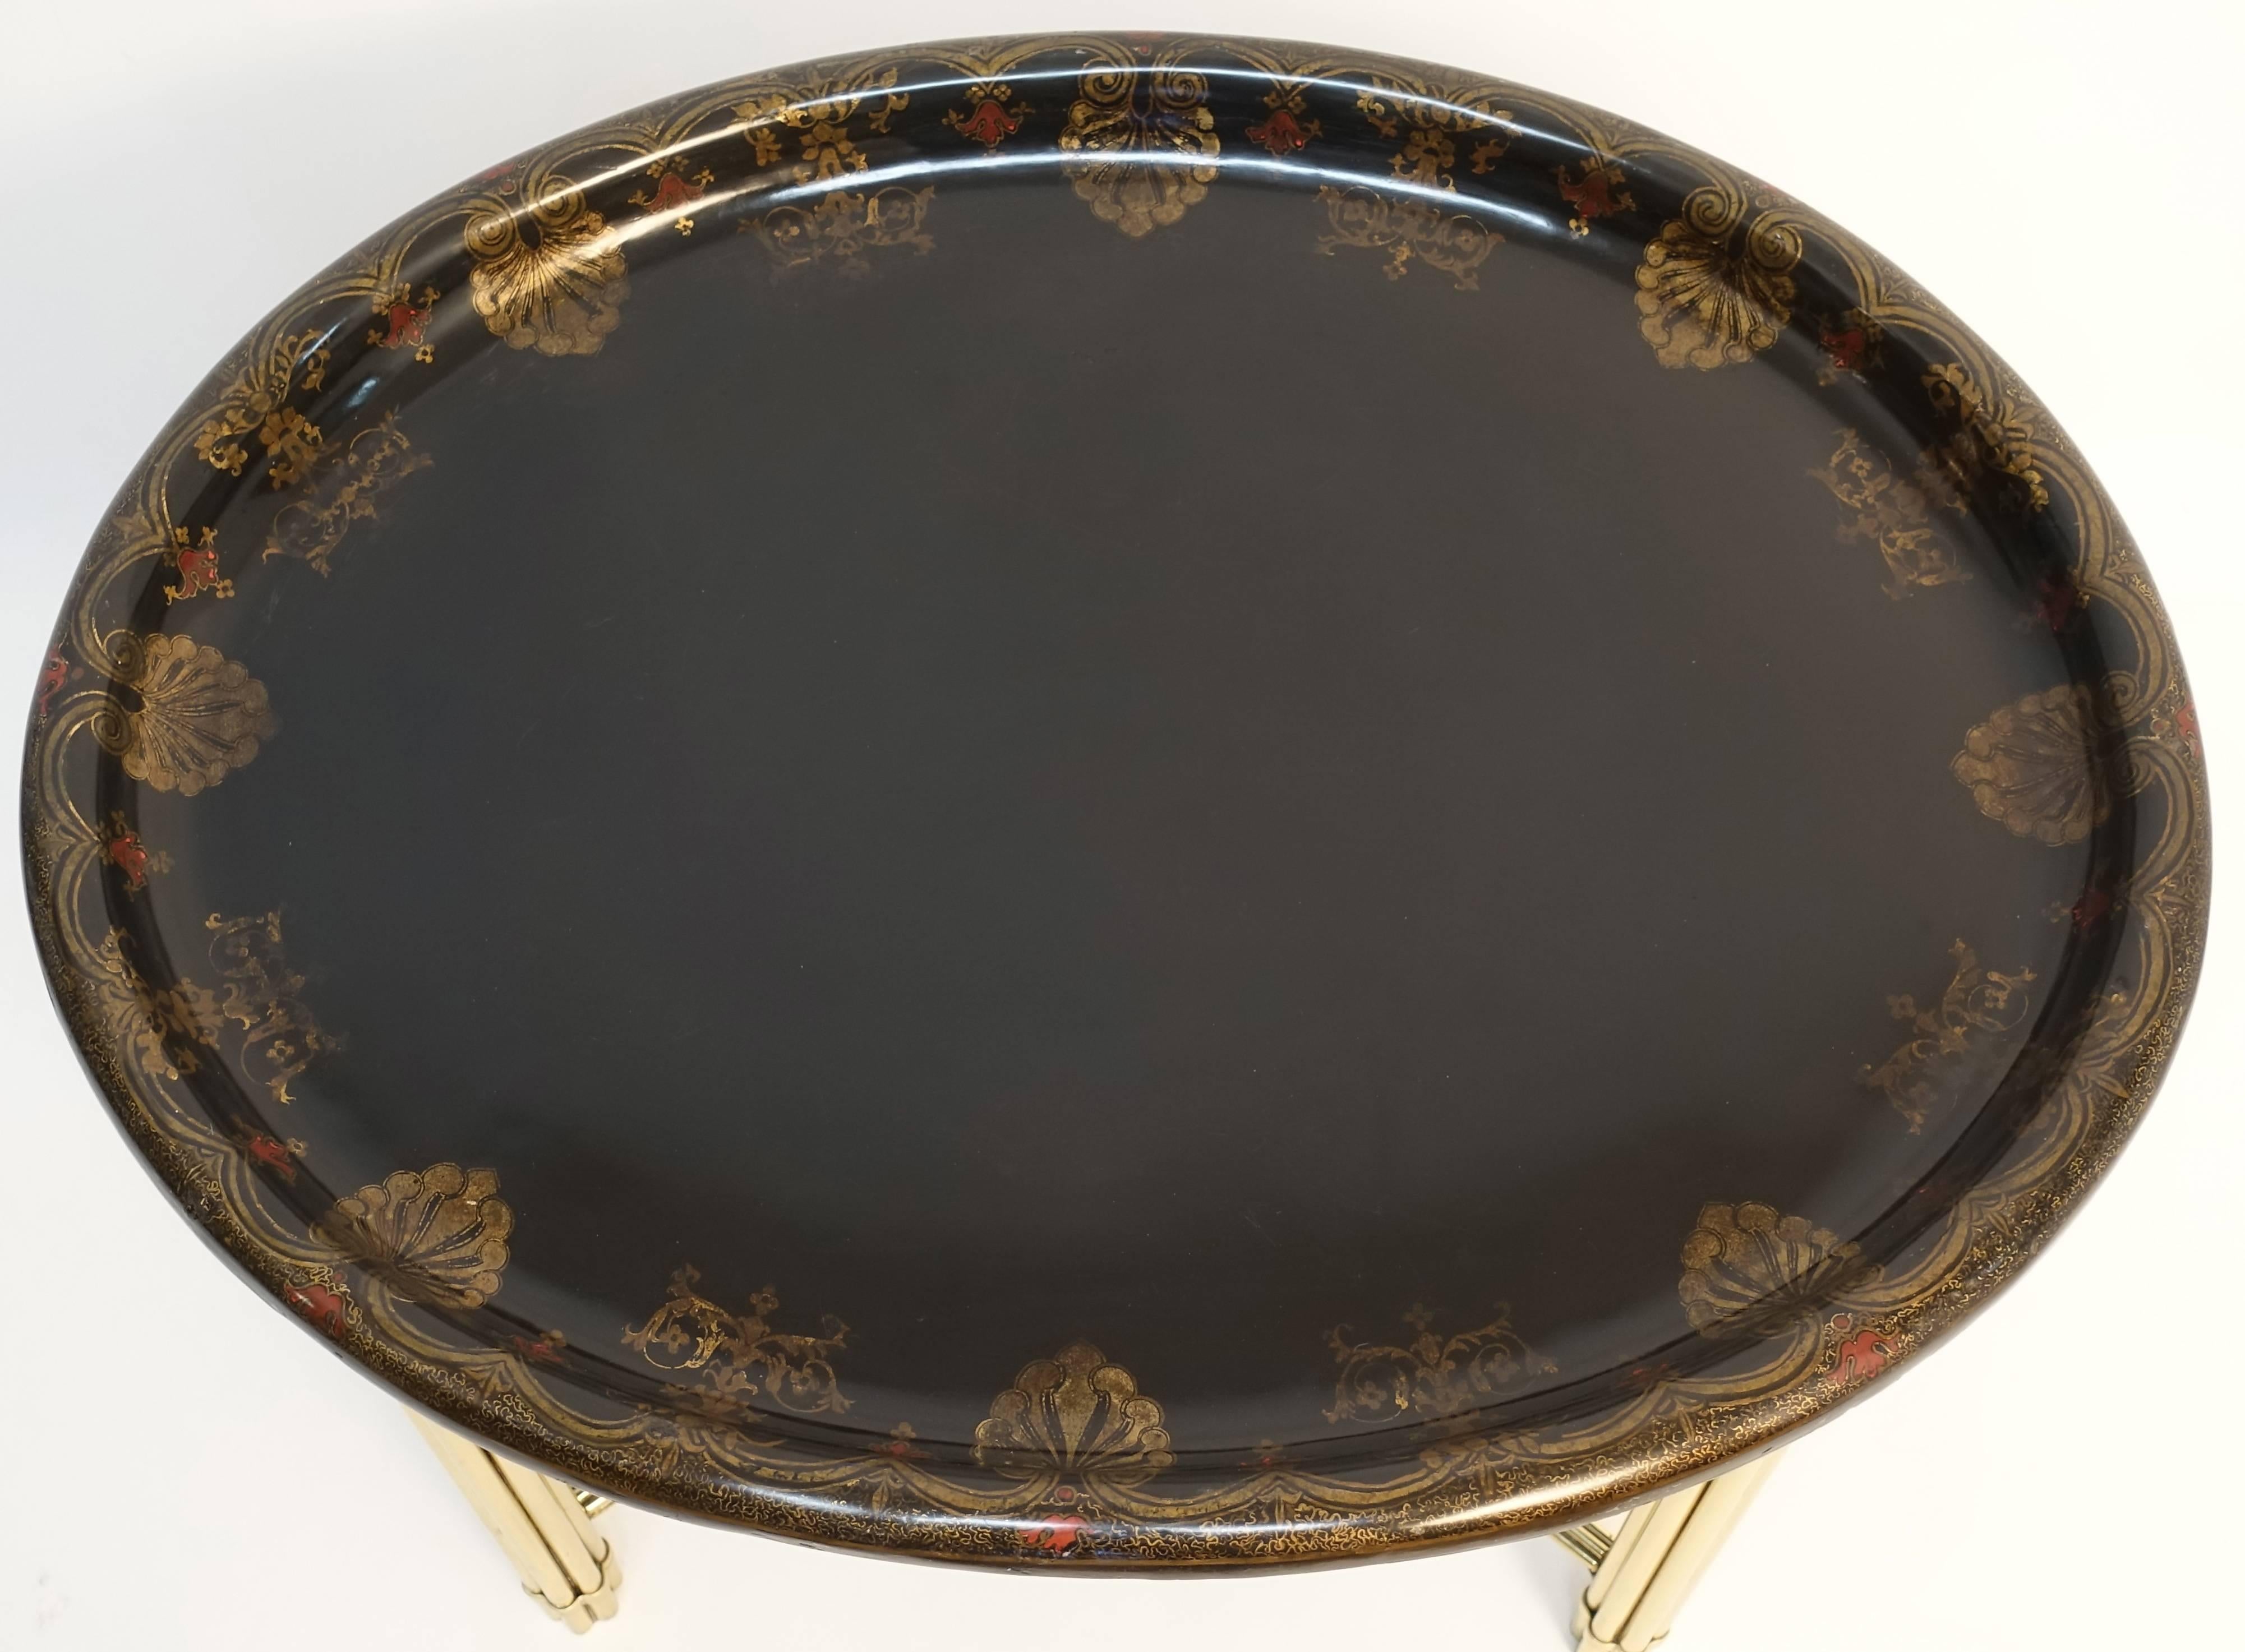 Very good oval papier mâché tray with hand decorated border of alternating gilt palmetts and scrolling swags with accents of red mixing with the gilt and black ground sitting on a later faux bamboo brass stand. The paper mâché tray is circa 1830 and